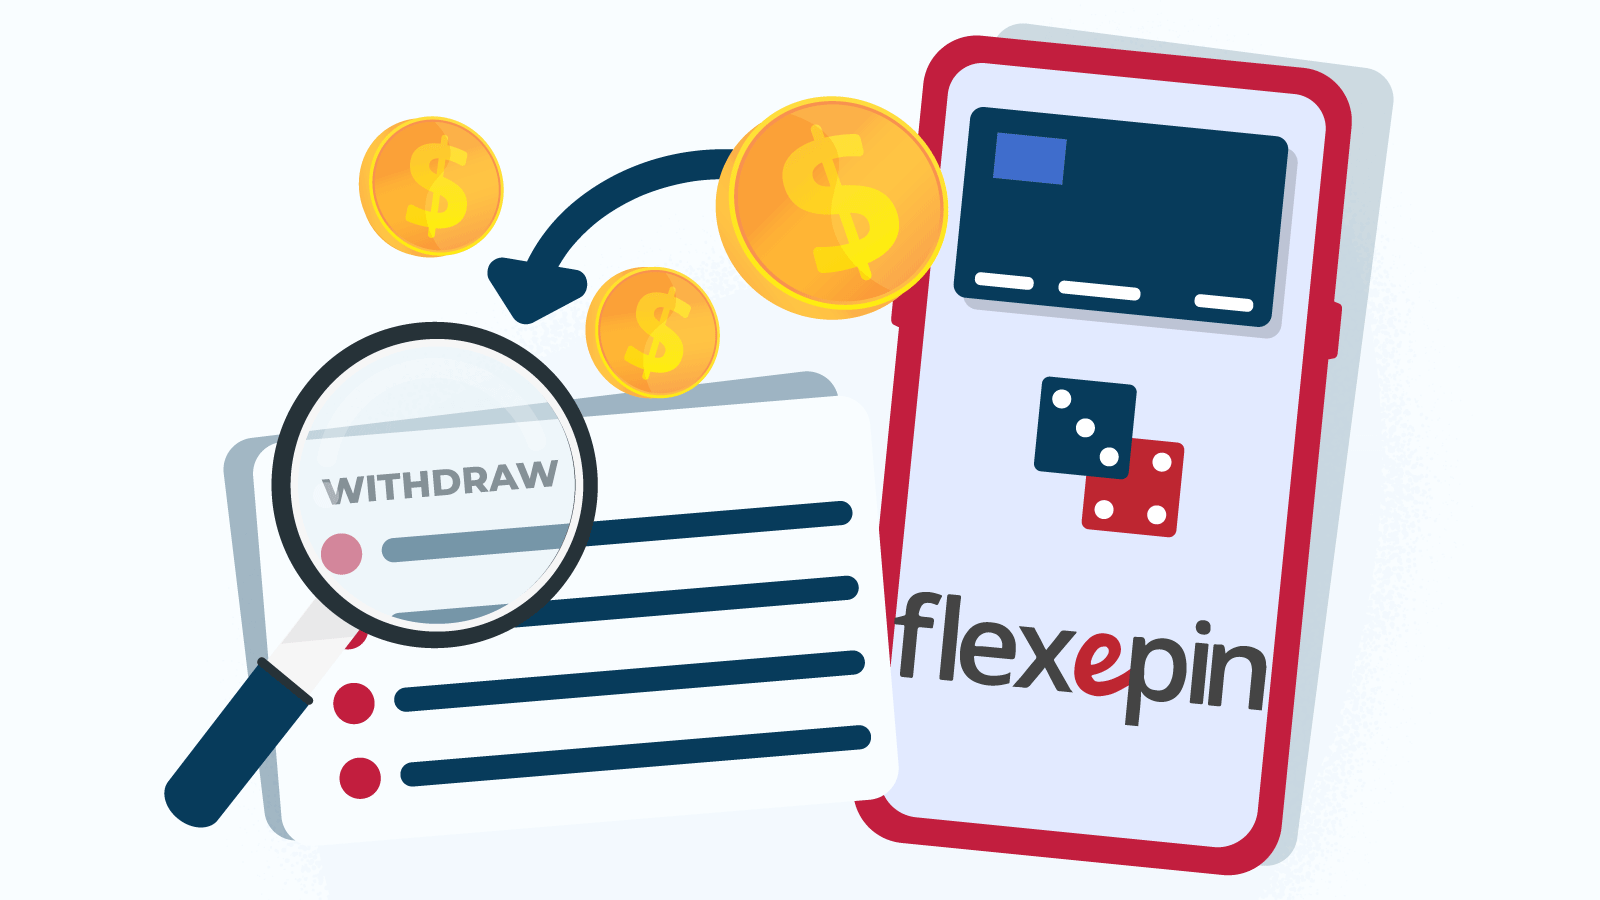 How Can You Withdraw Money from Flexepin